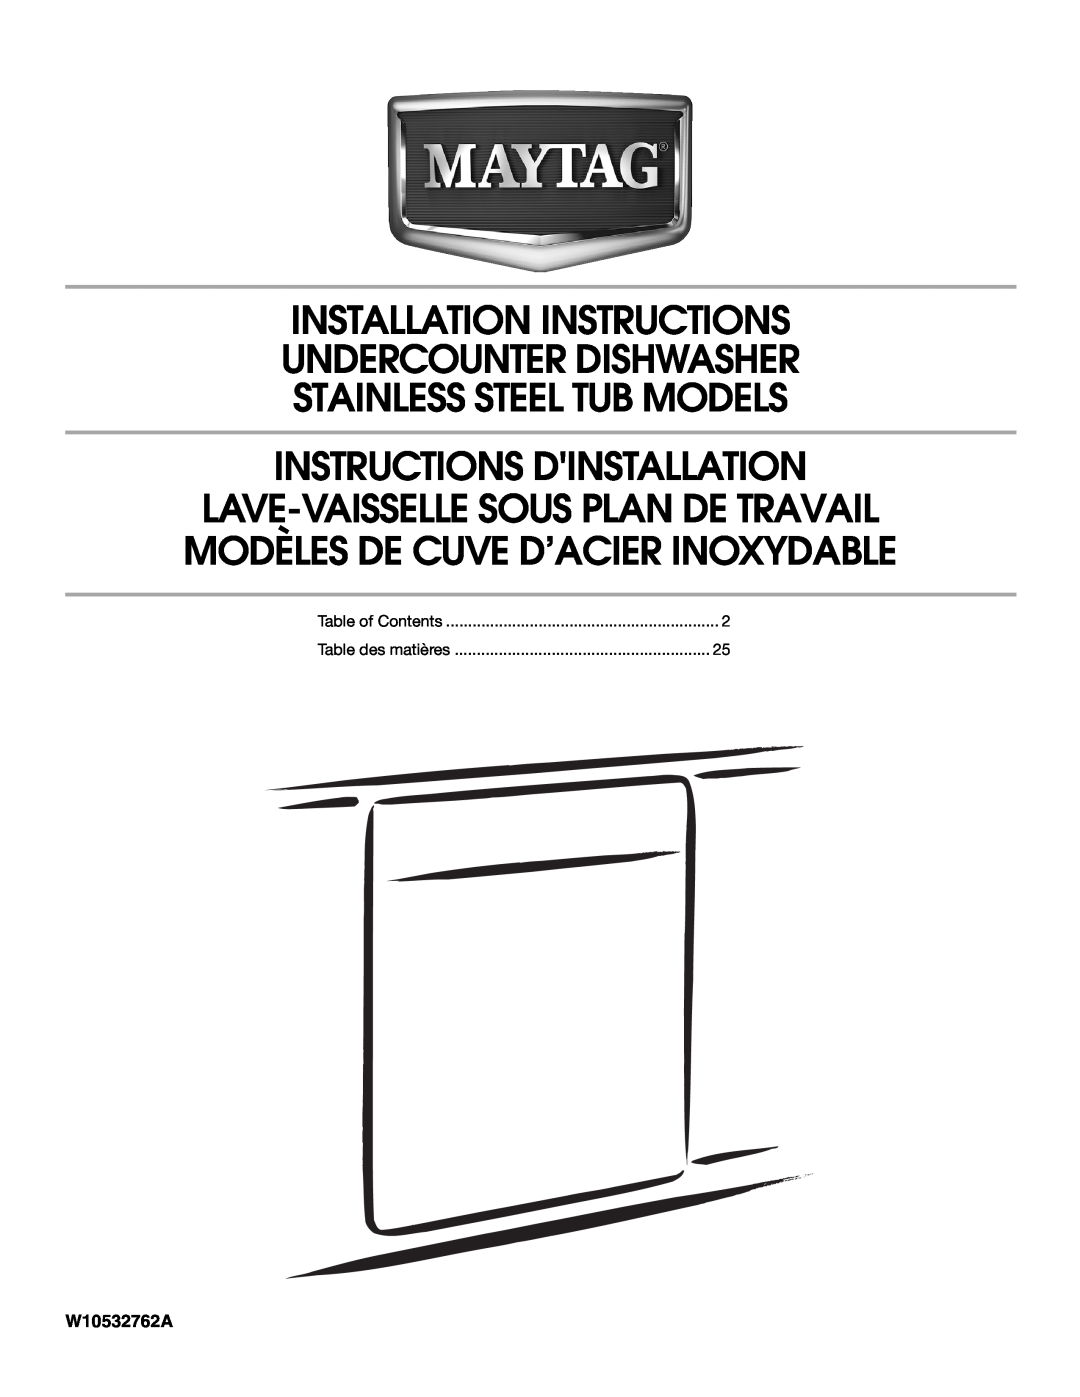 Maytag W10532762A installation instructions Installation Instructions Undercounter Dishwasher, Stainless Steel Tub Models 